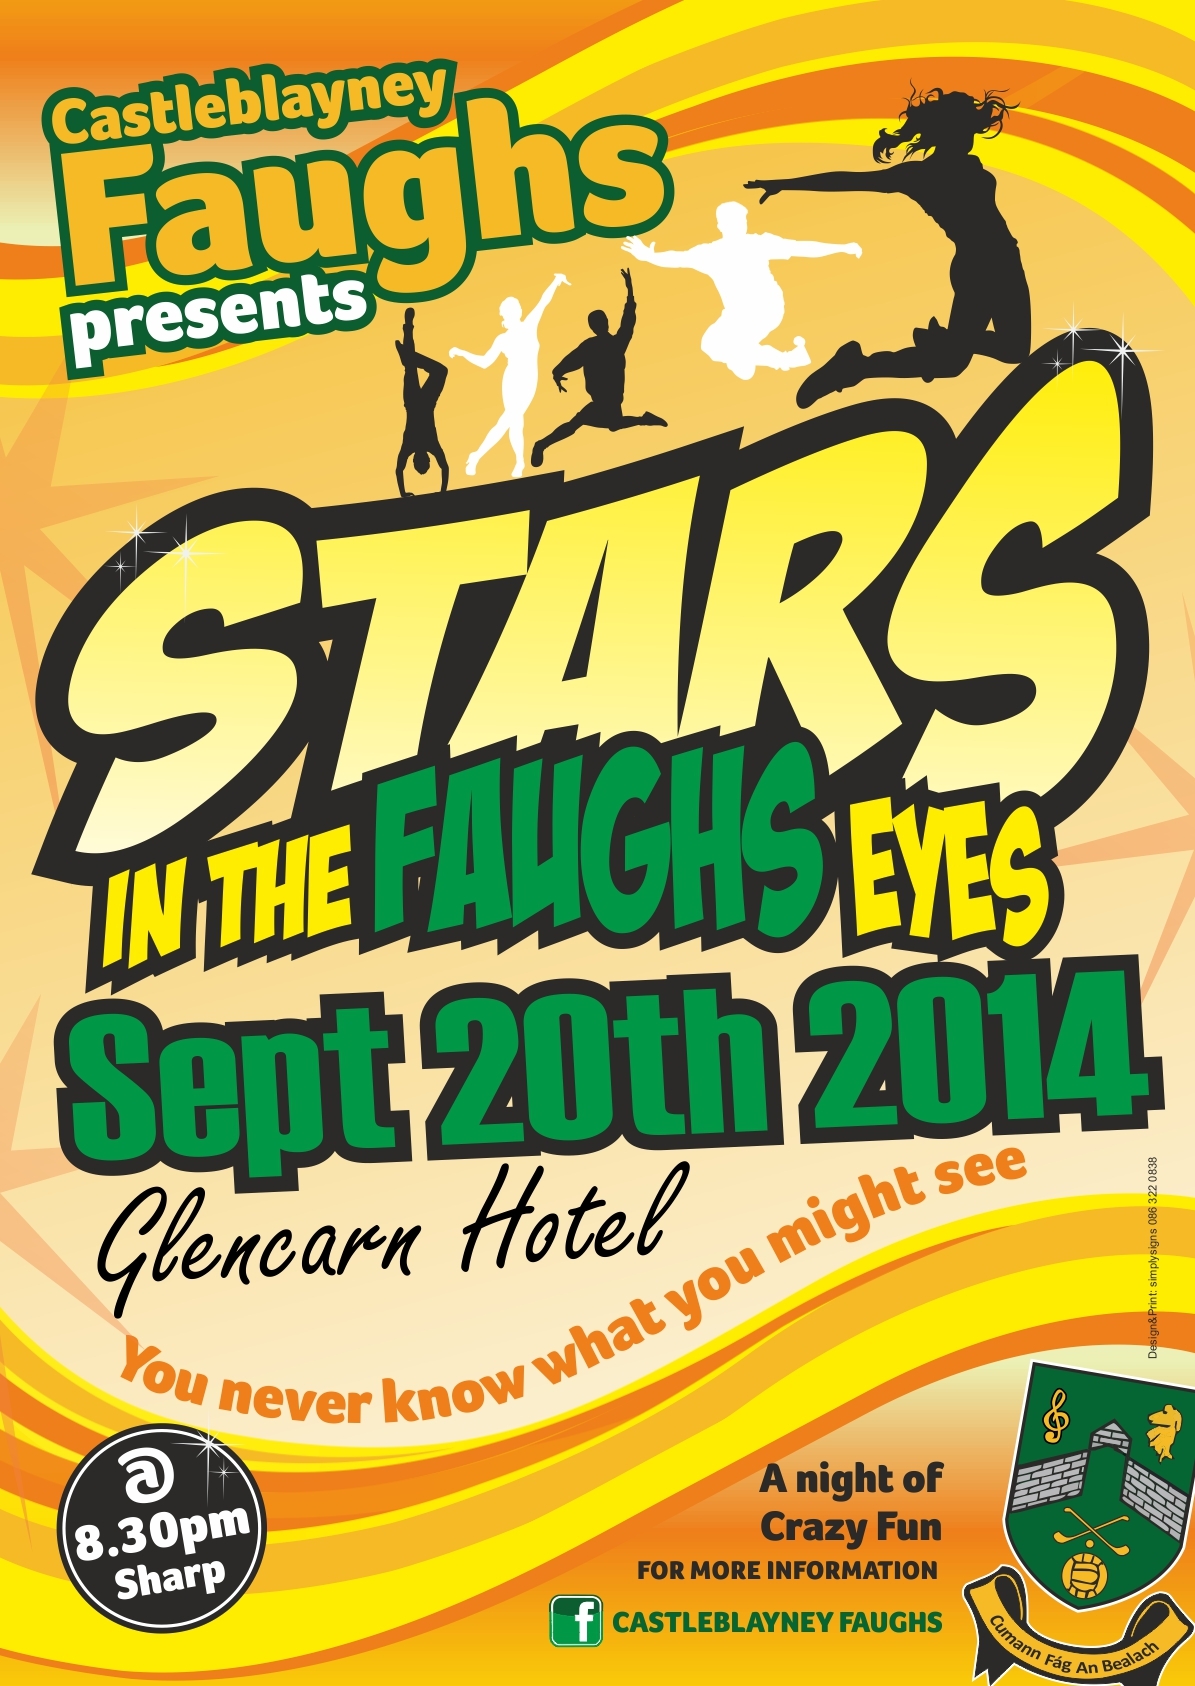 Stars in the Faughs Eyes